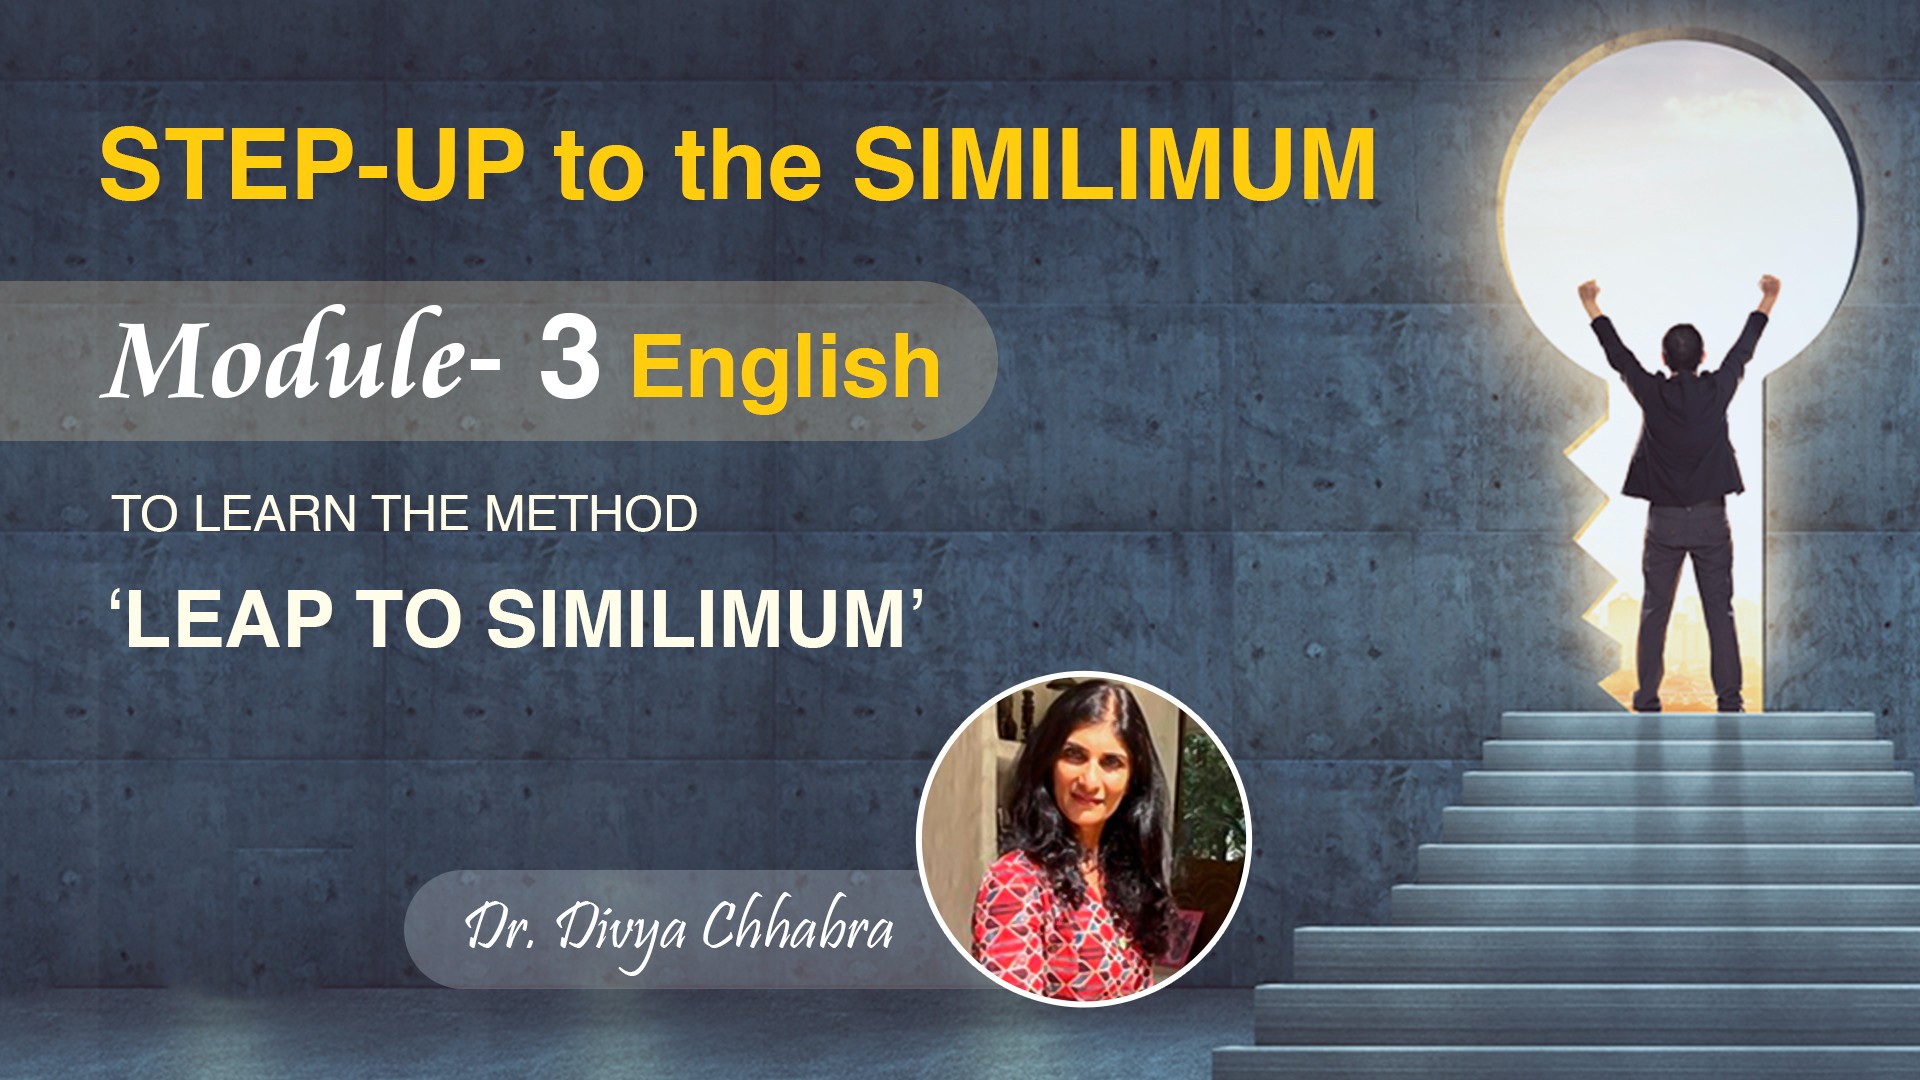 Step-Up to the Similimum - Module 03 - English